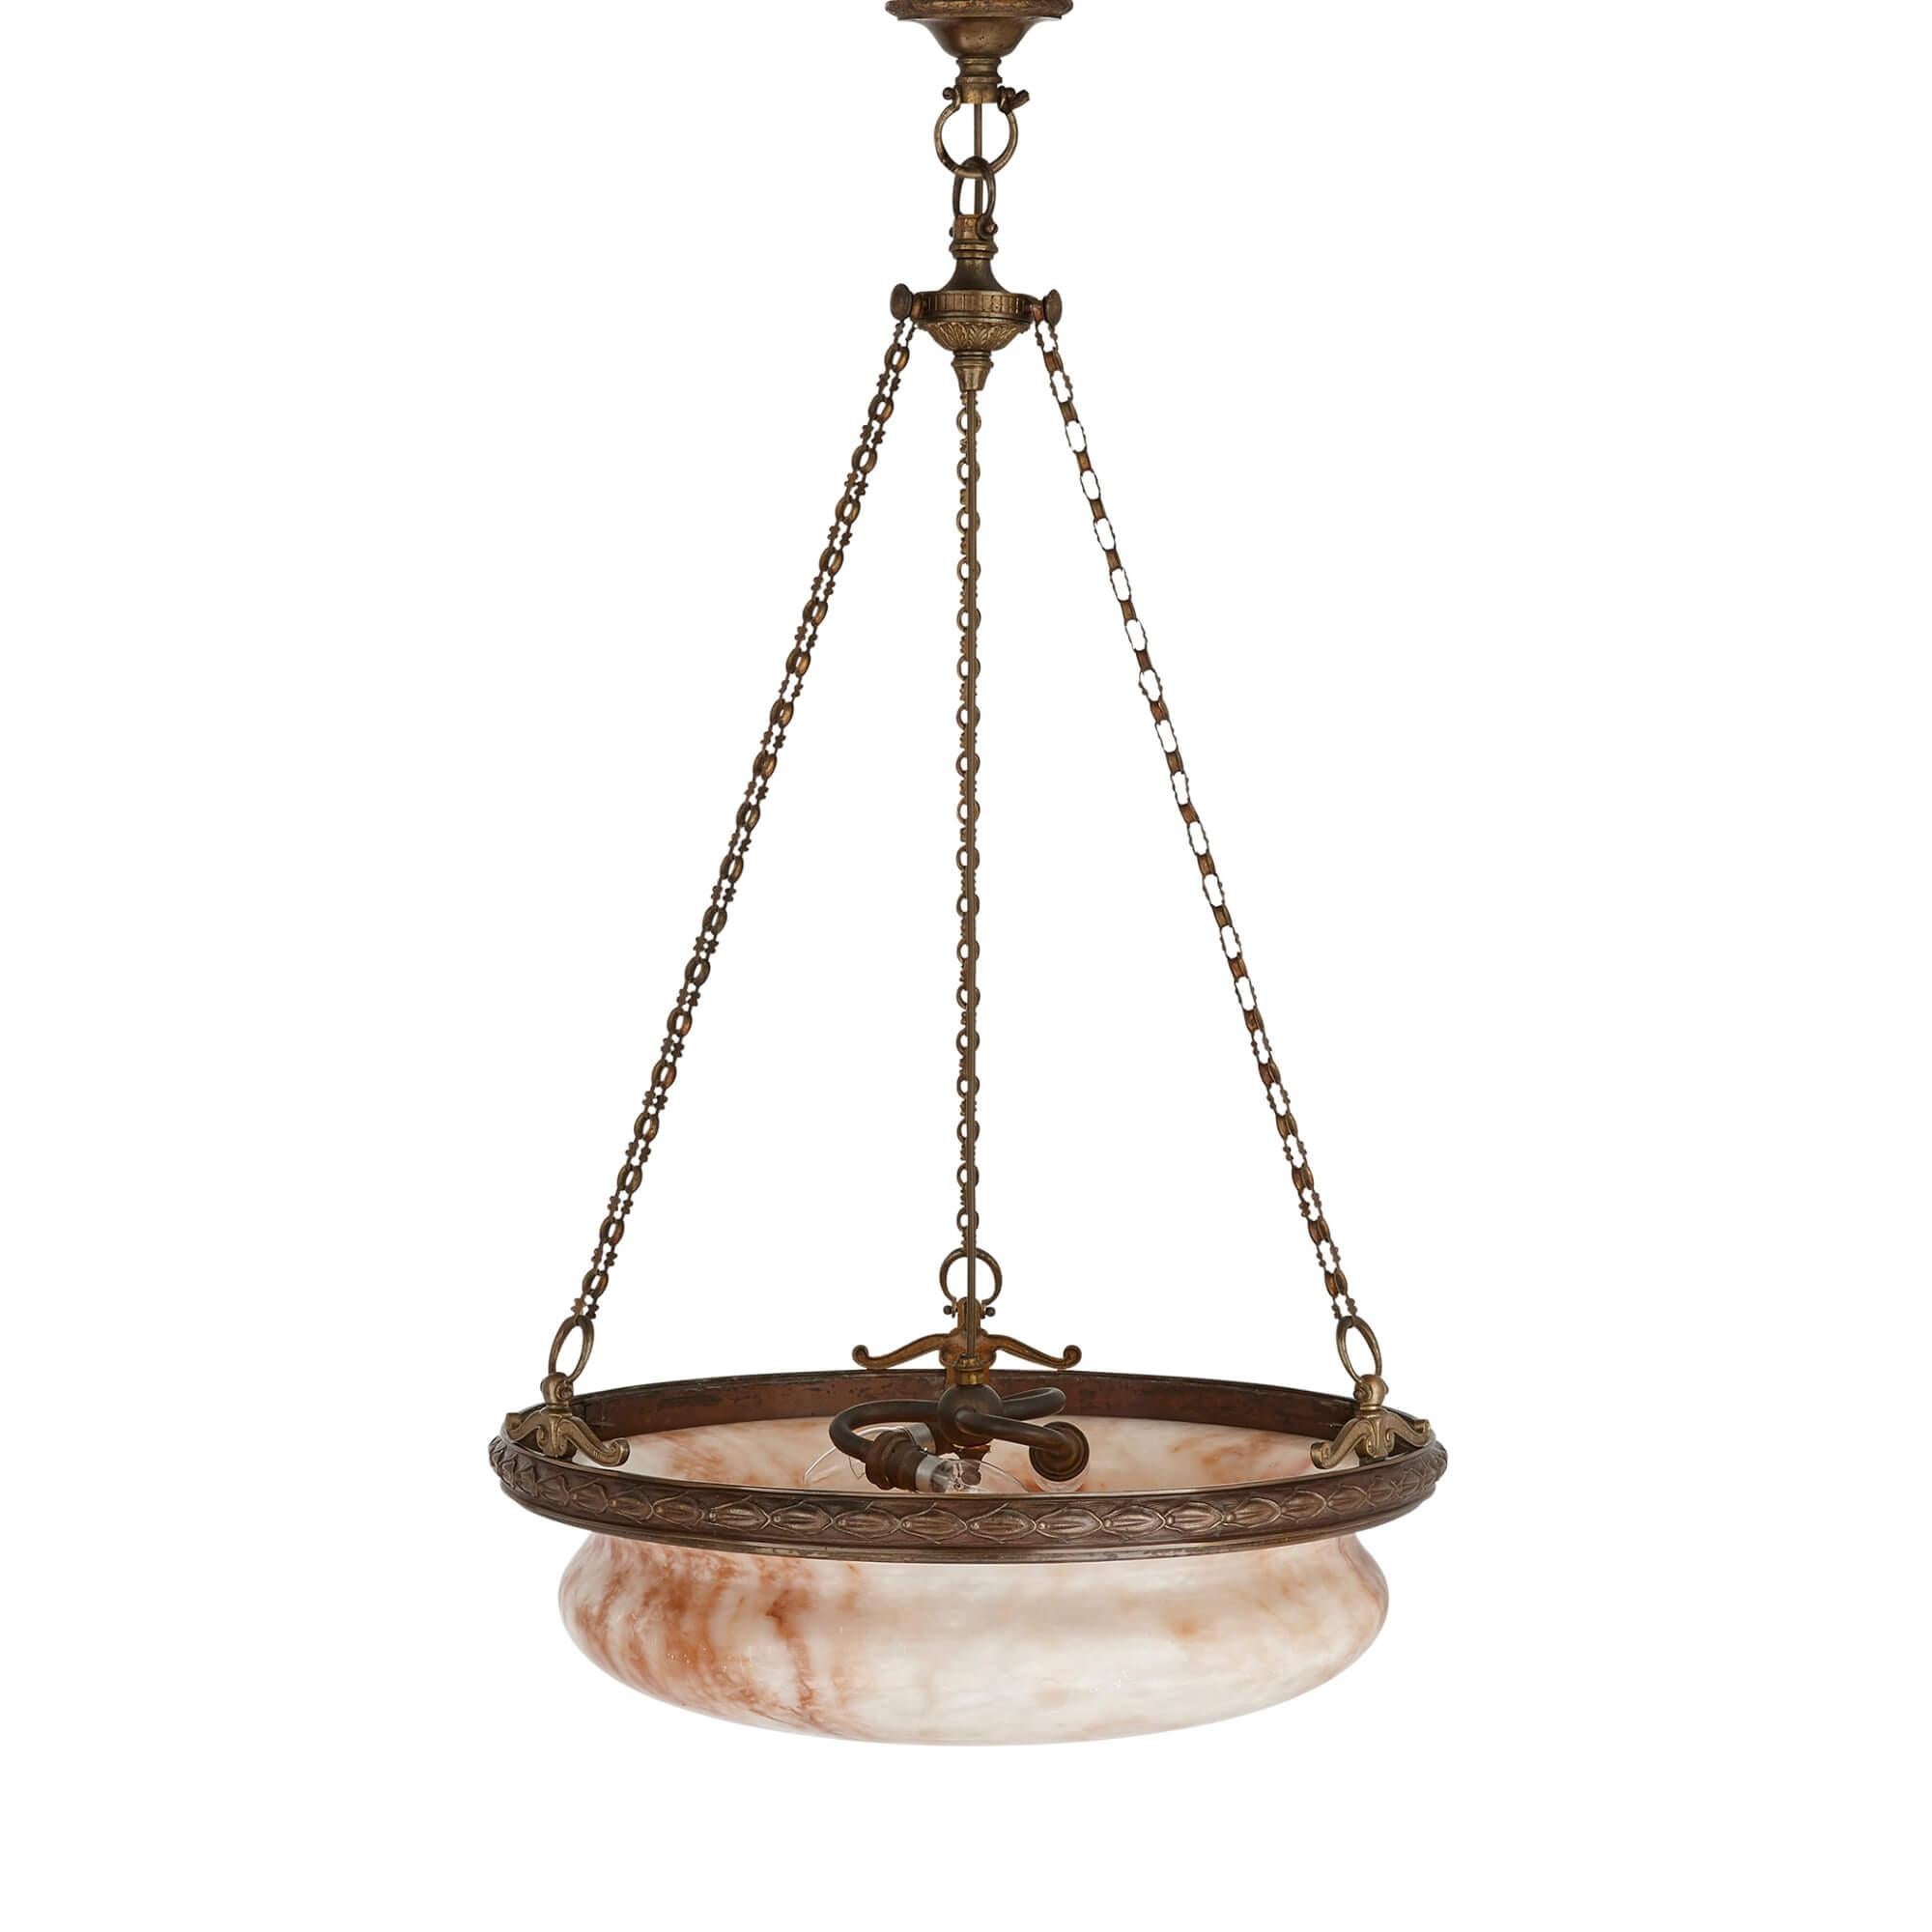 French neoclassical bronze and alabaster chandelier
French, early 20th Century
Measures: Height 100cm, diameter 53cm

The chandelier is crafted from veined alabaster and bronze in the Neoclassical style. The piece features an alabaster bowl,